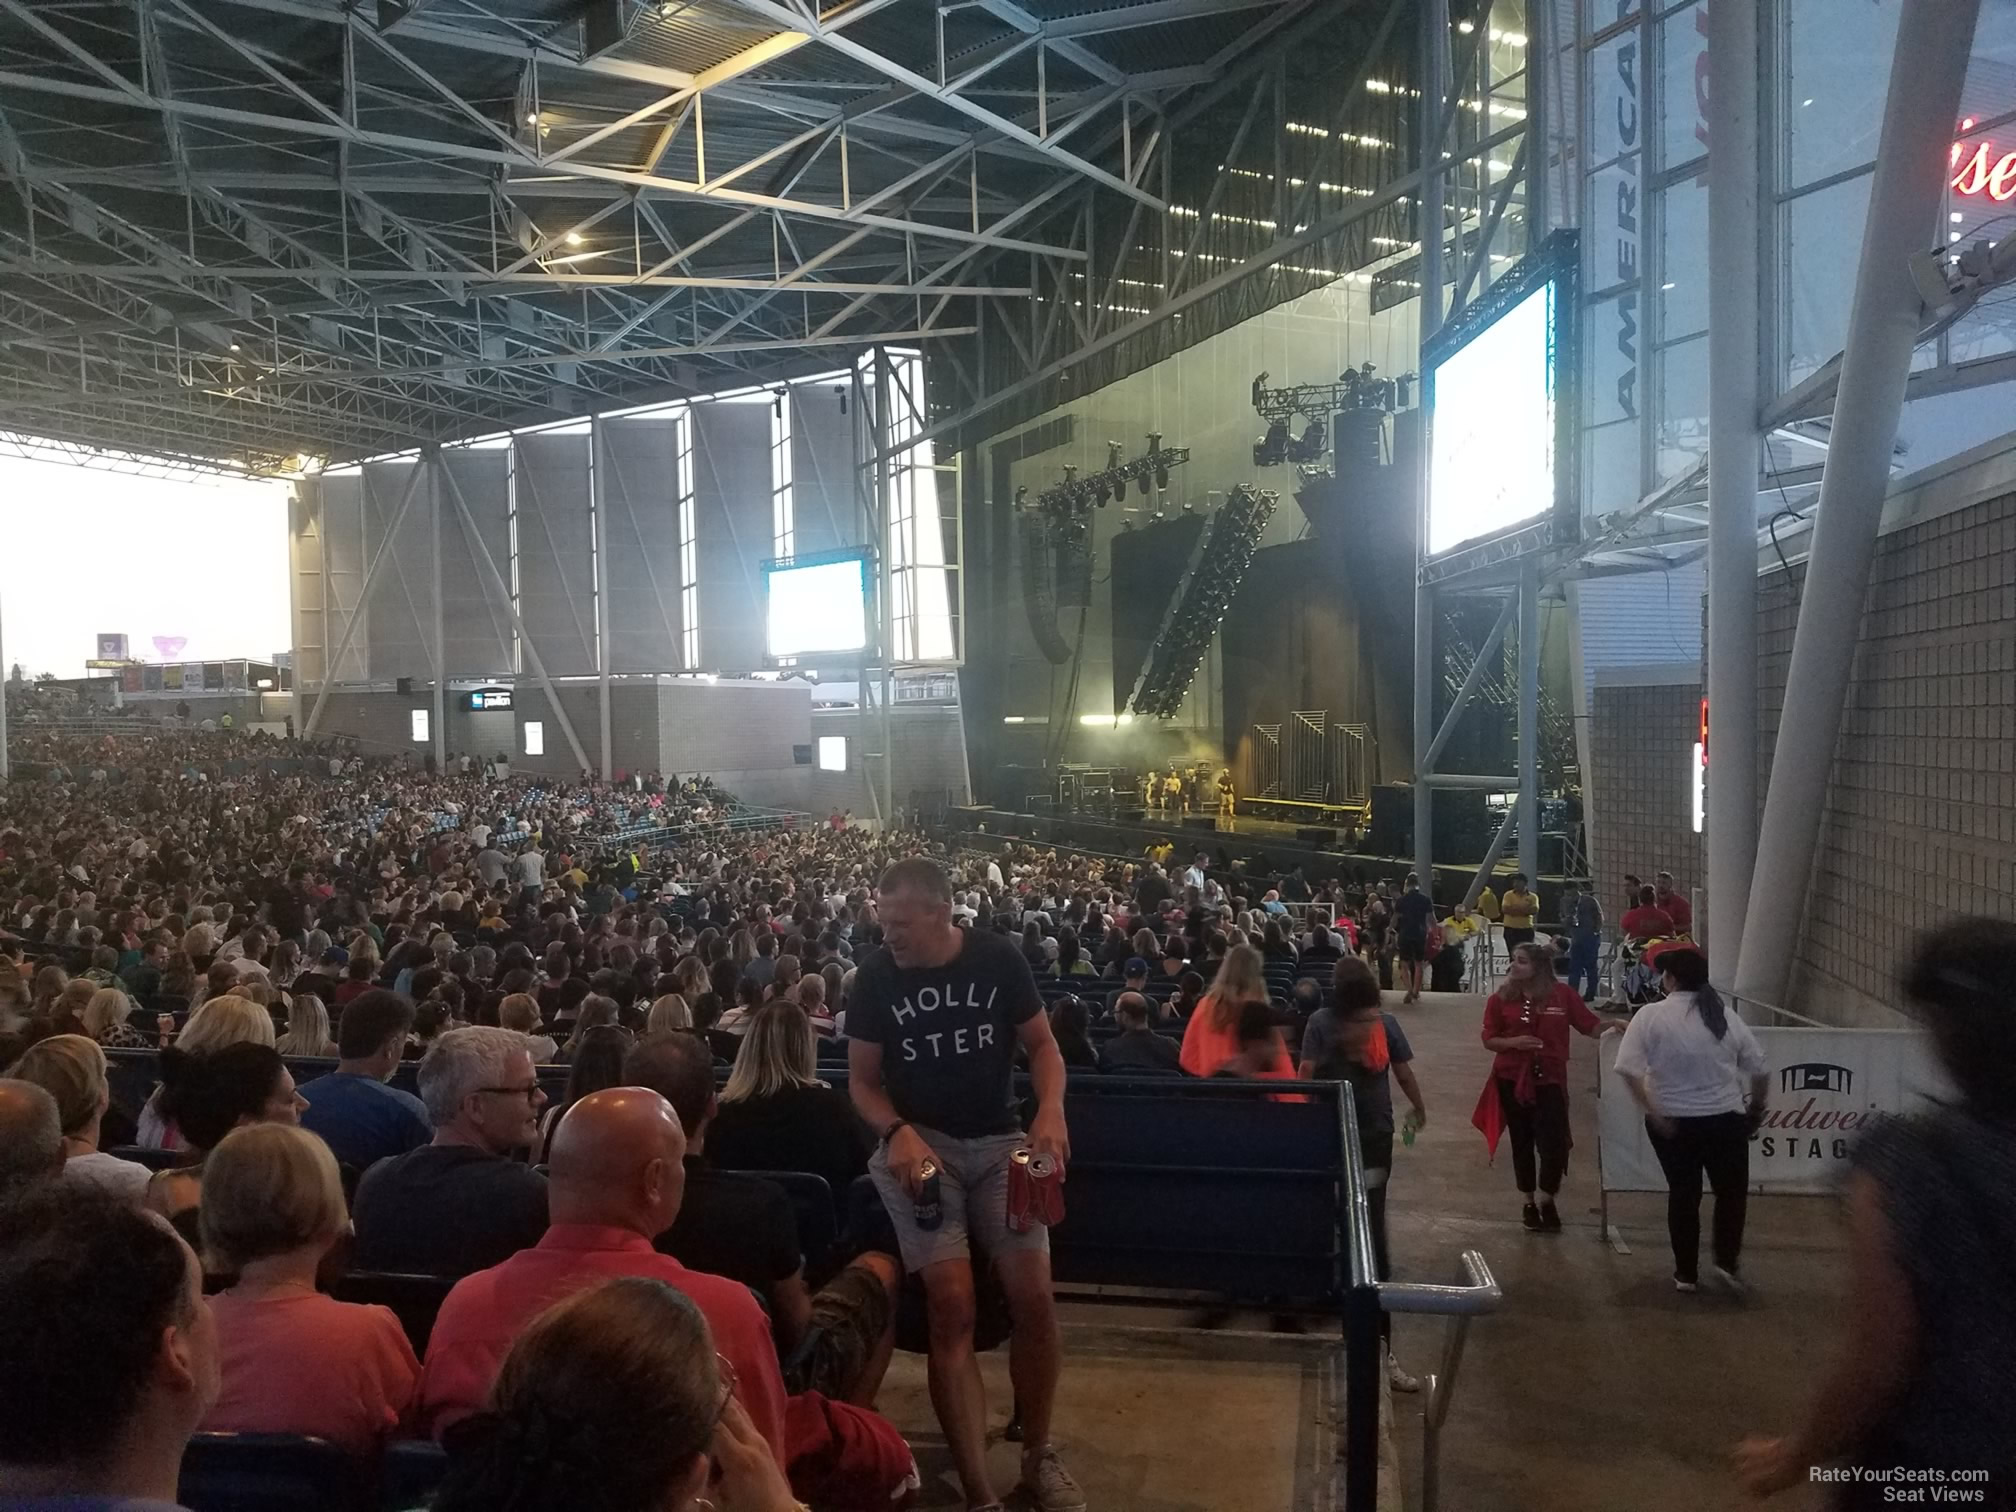 section 301 seat view  - budweiser stage